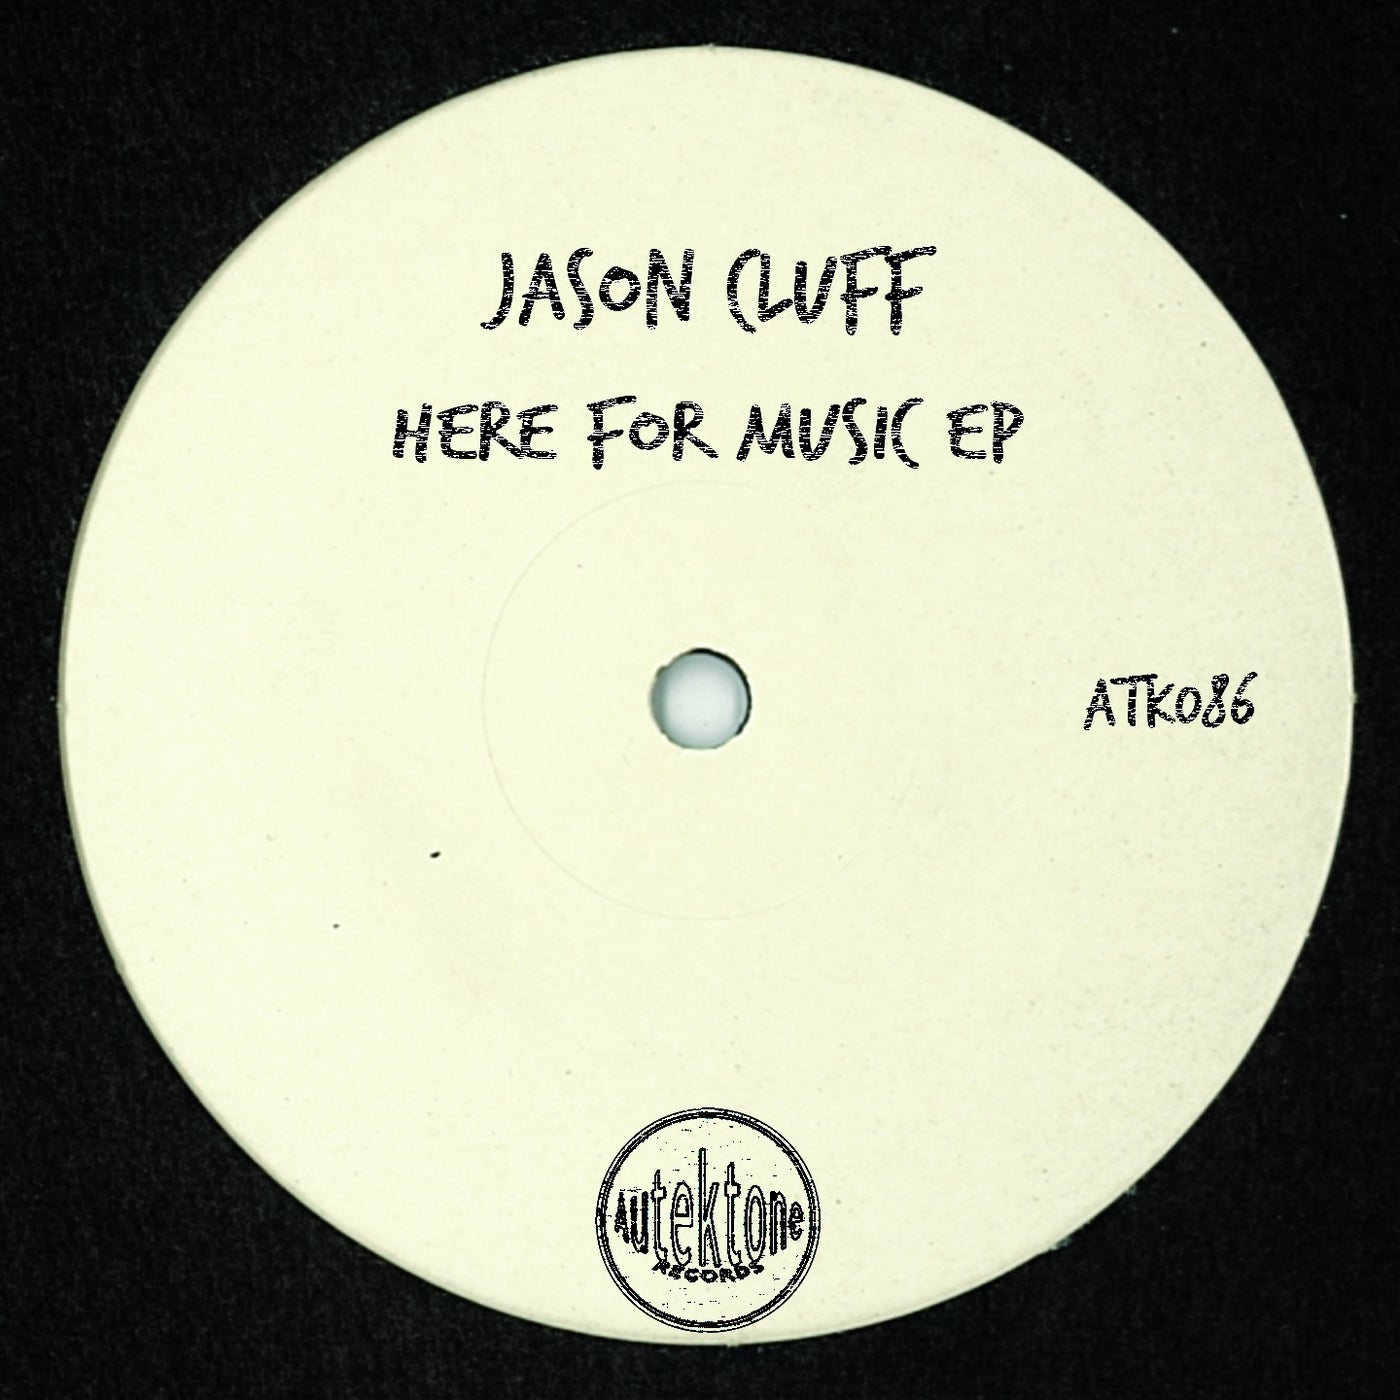 Jason Cluff – Here for Music [ATK086]